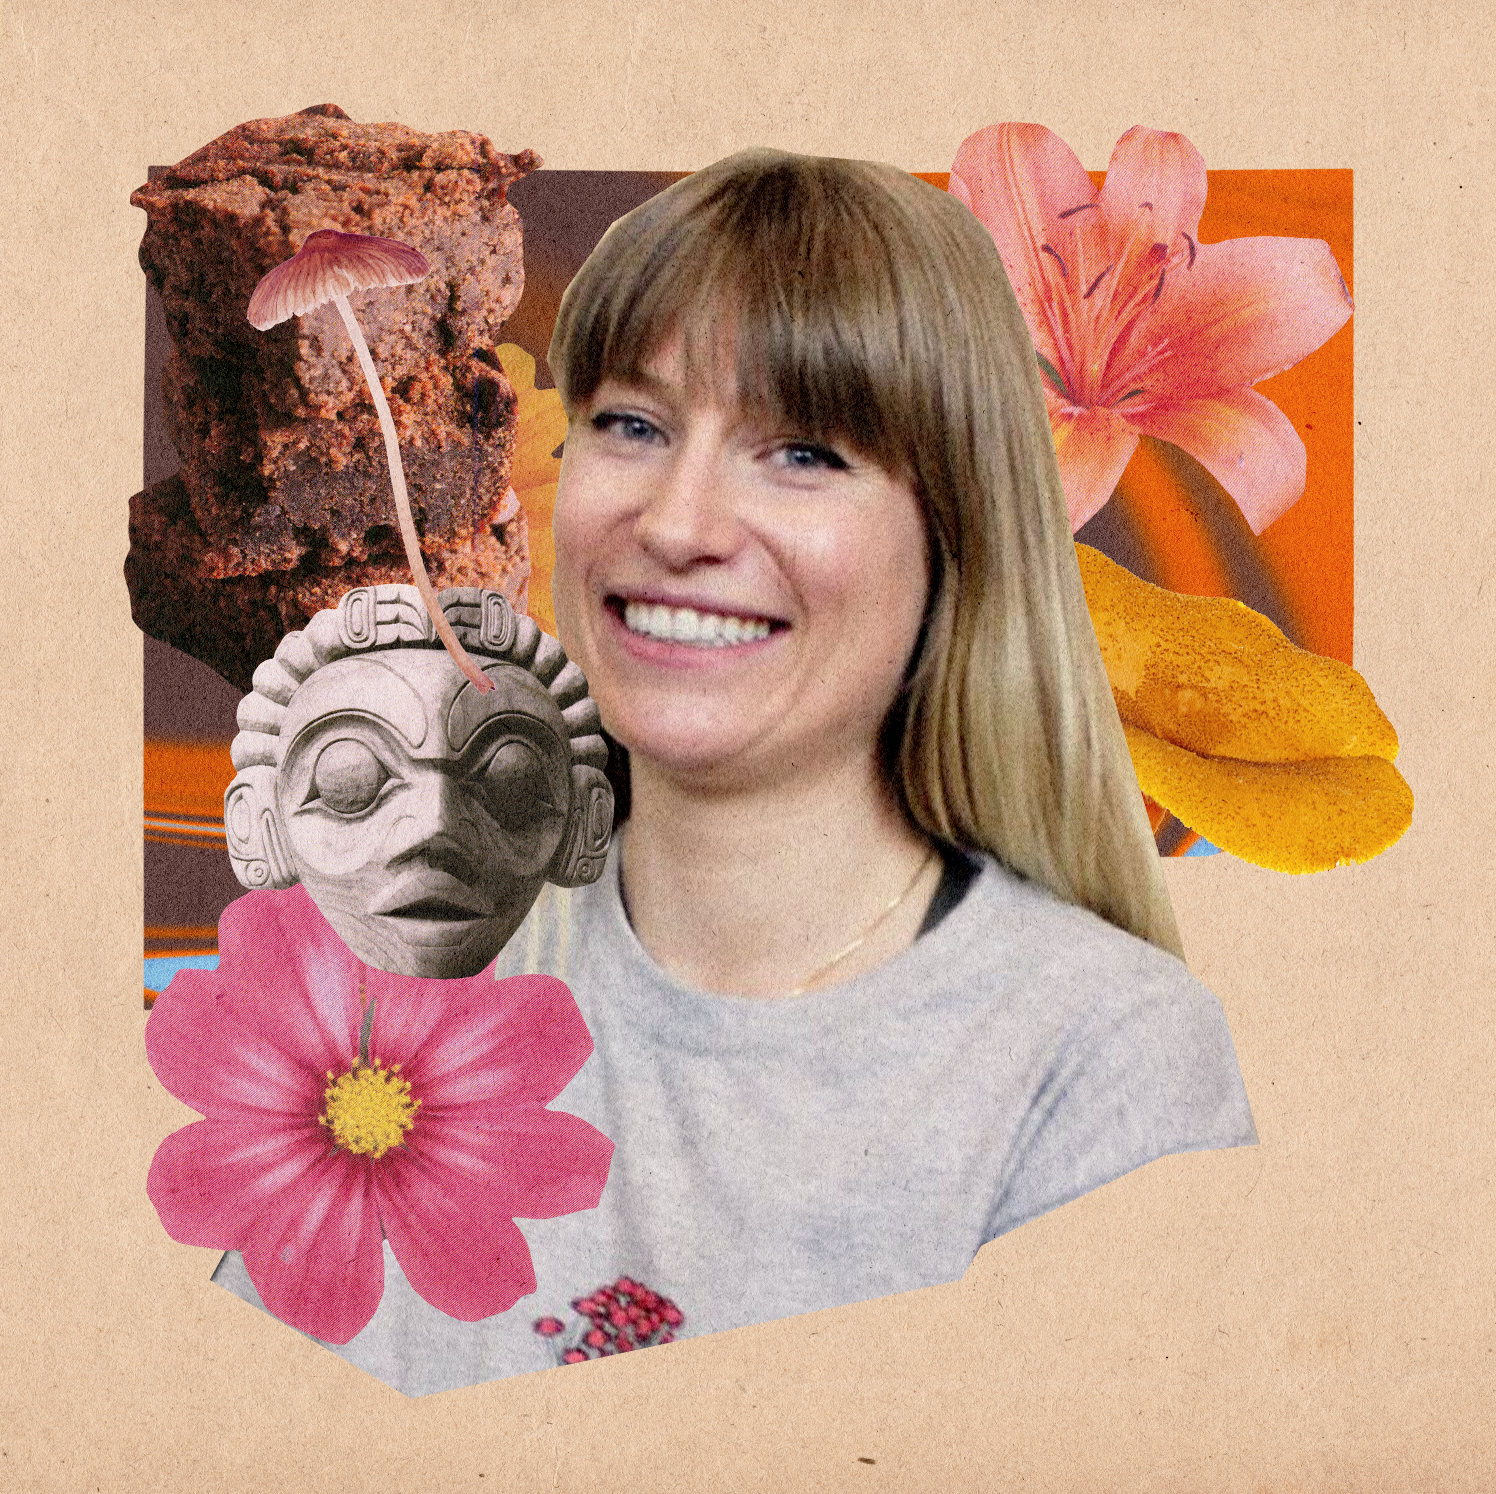 Lucid collage artwork featuring our founder and CEO, Csilla, with different collage elements layered including a flower, ancient headstone, mushrooms and sweet treats. 